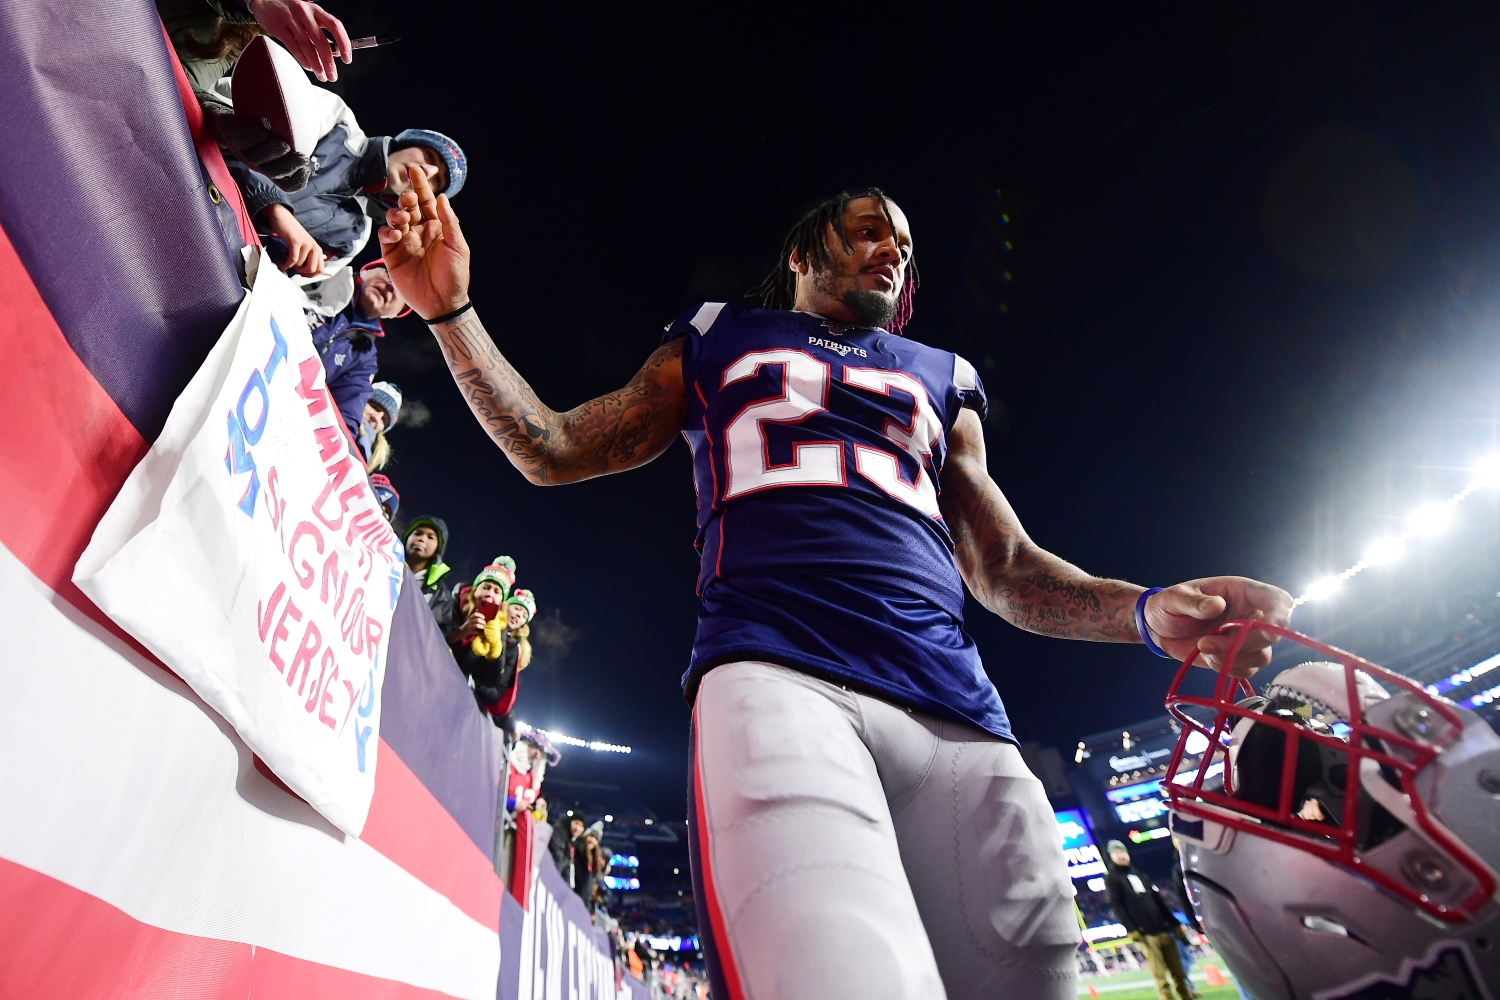 Patrick Chung signs autographs for New England Patriots fans after a win against the Buffalo Bills on Dec. 21, 2019.